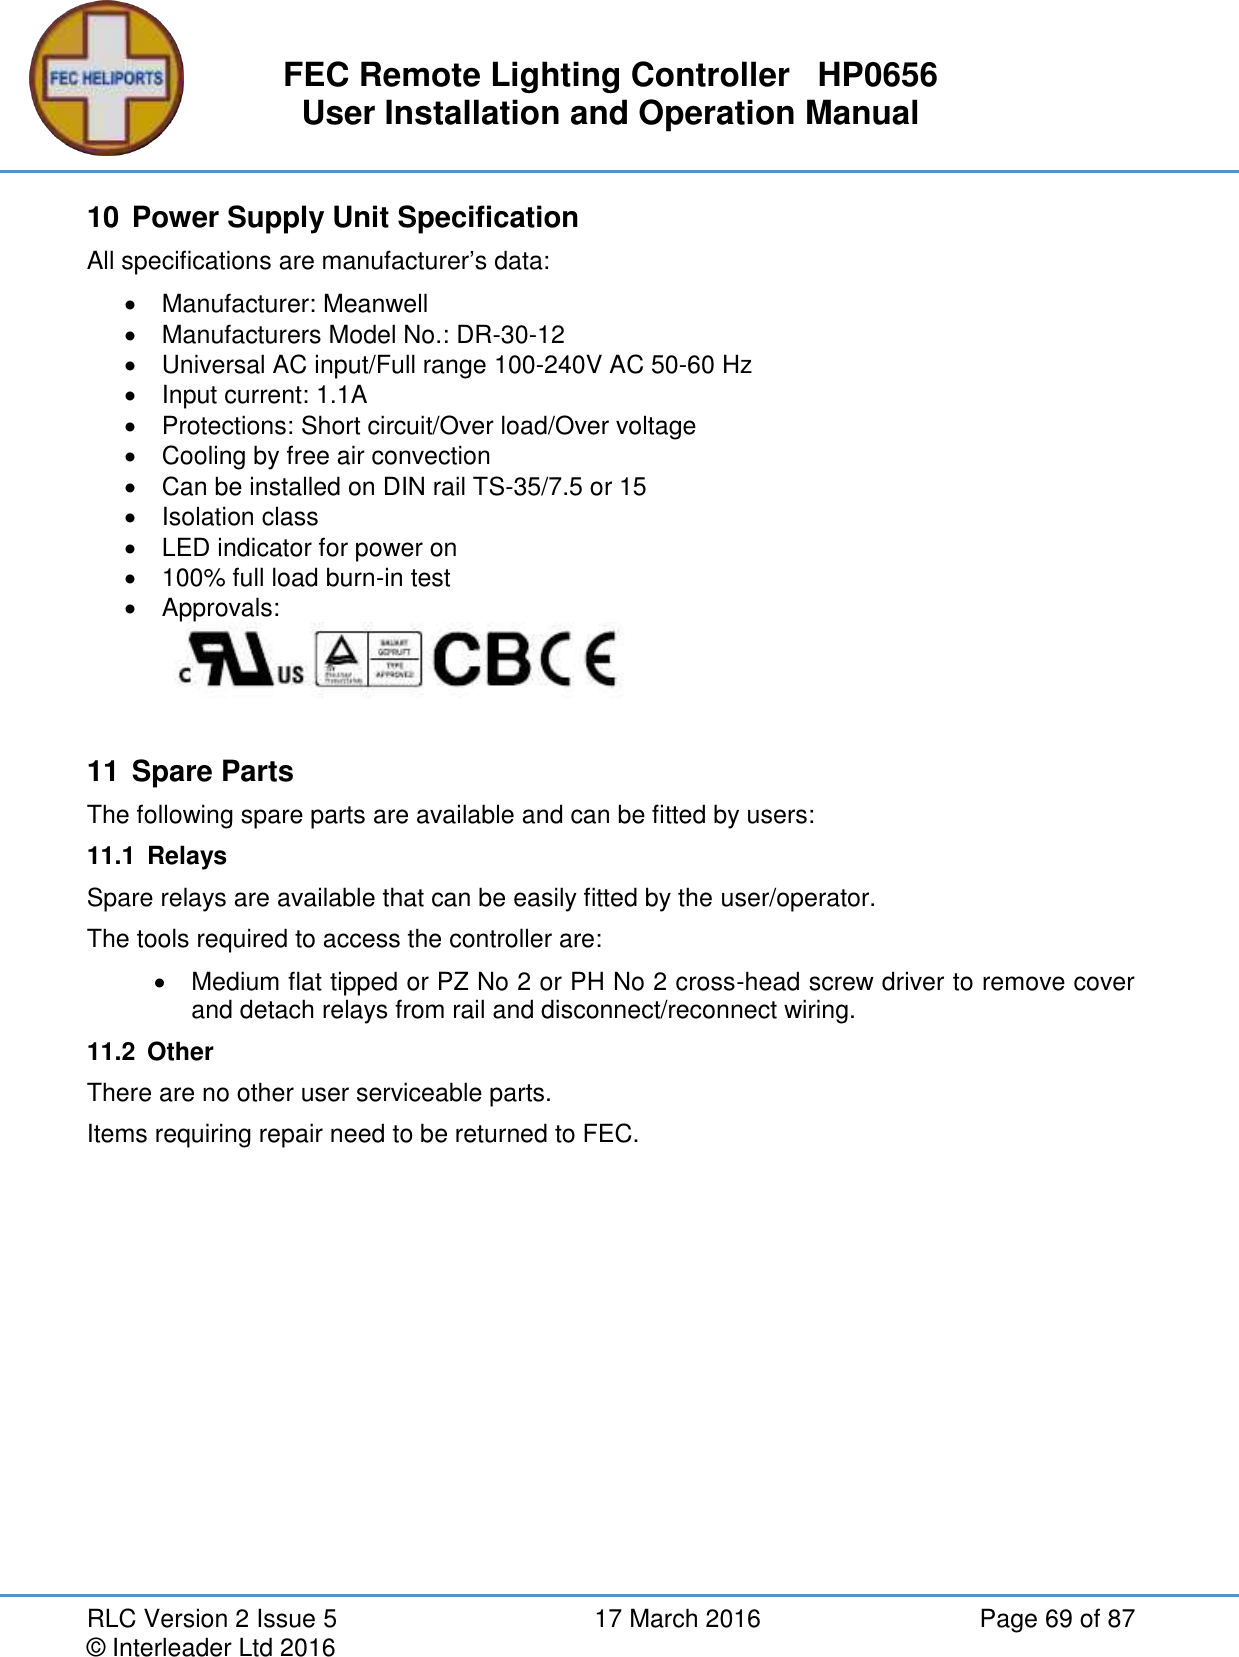 FEC Remote Lighting Controller   HP0656 User Installation and Operation Manual RLC Version 2 Issue 5  17 March 2016  Page 69 of 87 © Interleader Ltd 2016 10 Power Supply Unit Specification All specifications are manufacturer’s data:   Manufacturer: Meanwell   Manufacturers Model No.: DR-30-12   Universal AC input/Full range 100-240V AC 50-60 Hz   Input current: 1.1A   Protections: Short circuit/Over load/Over voltage   Cooling by free air convection   Can be installed on DIN rail TS-35/7.5 or 15   Isolation class   LED indicator for power on   100% full load burn-in test   Approvals:   11 Spare Parts The following spare parts are available and can be fitted by users: 11.1  Relays Spare relays are available that can be easily fitted by the user/operator. The tools required to access the controller are:   Medium flat tipped or PZ No 2 or PH No 2 cross-head screw driver to remove cover and detach relays from rail and disconnect/reconnect wiring. 11.2  Other There are no other user serviceable parts. Items requiring repair need to be returned to FEC.   